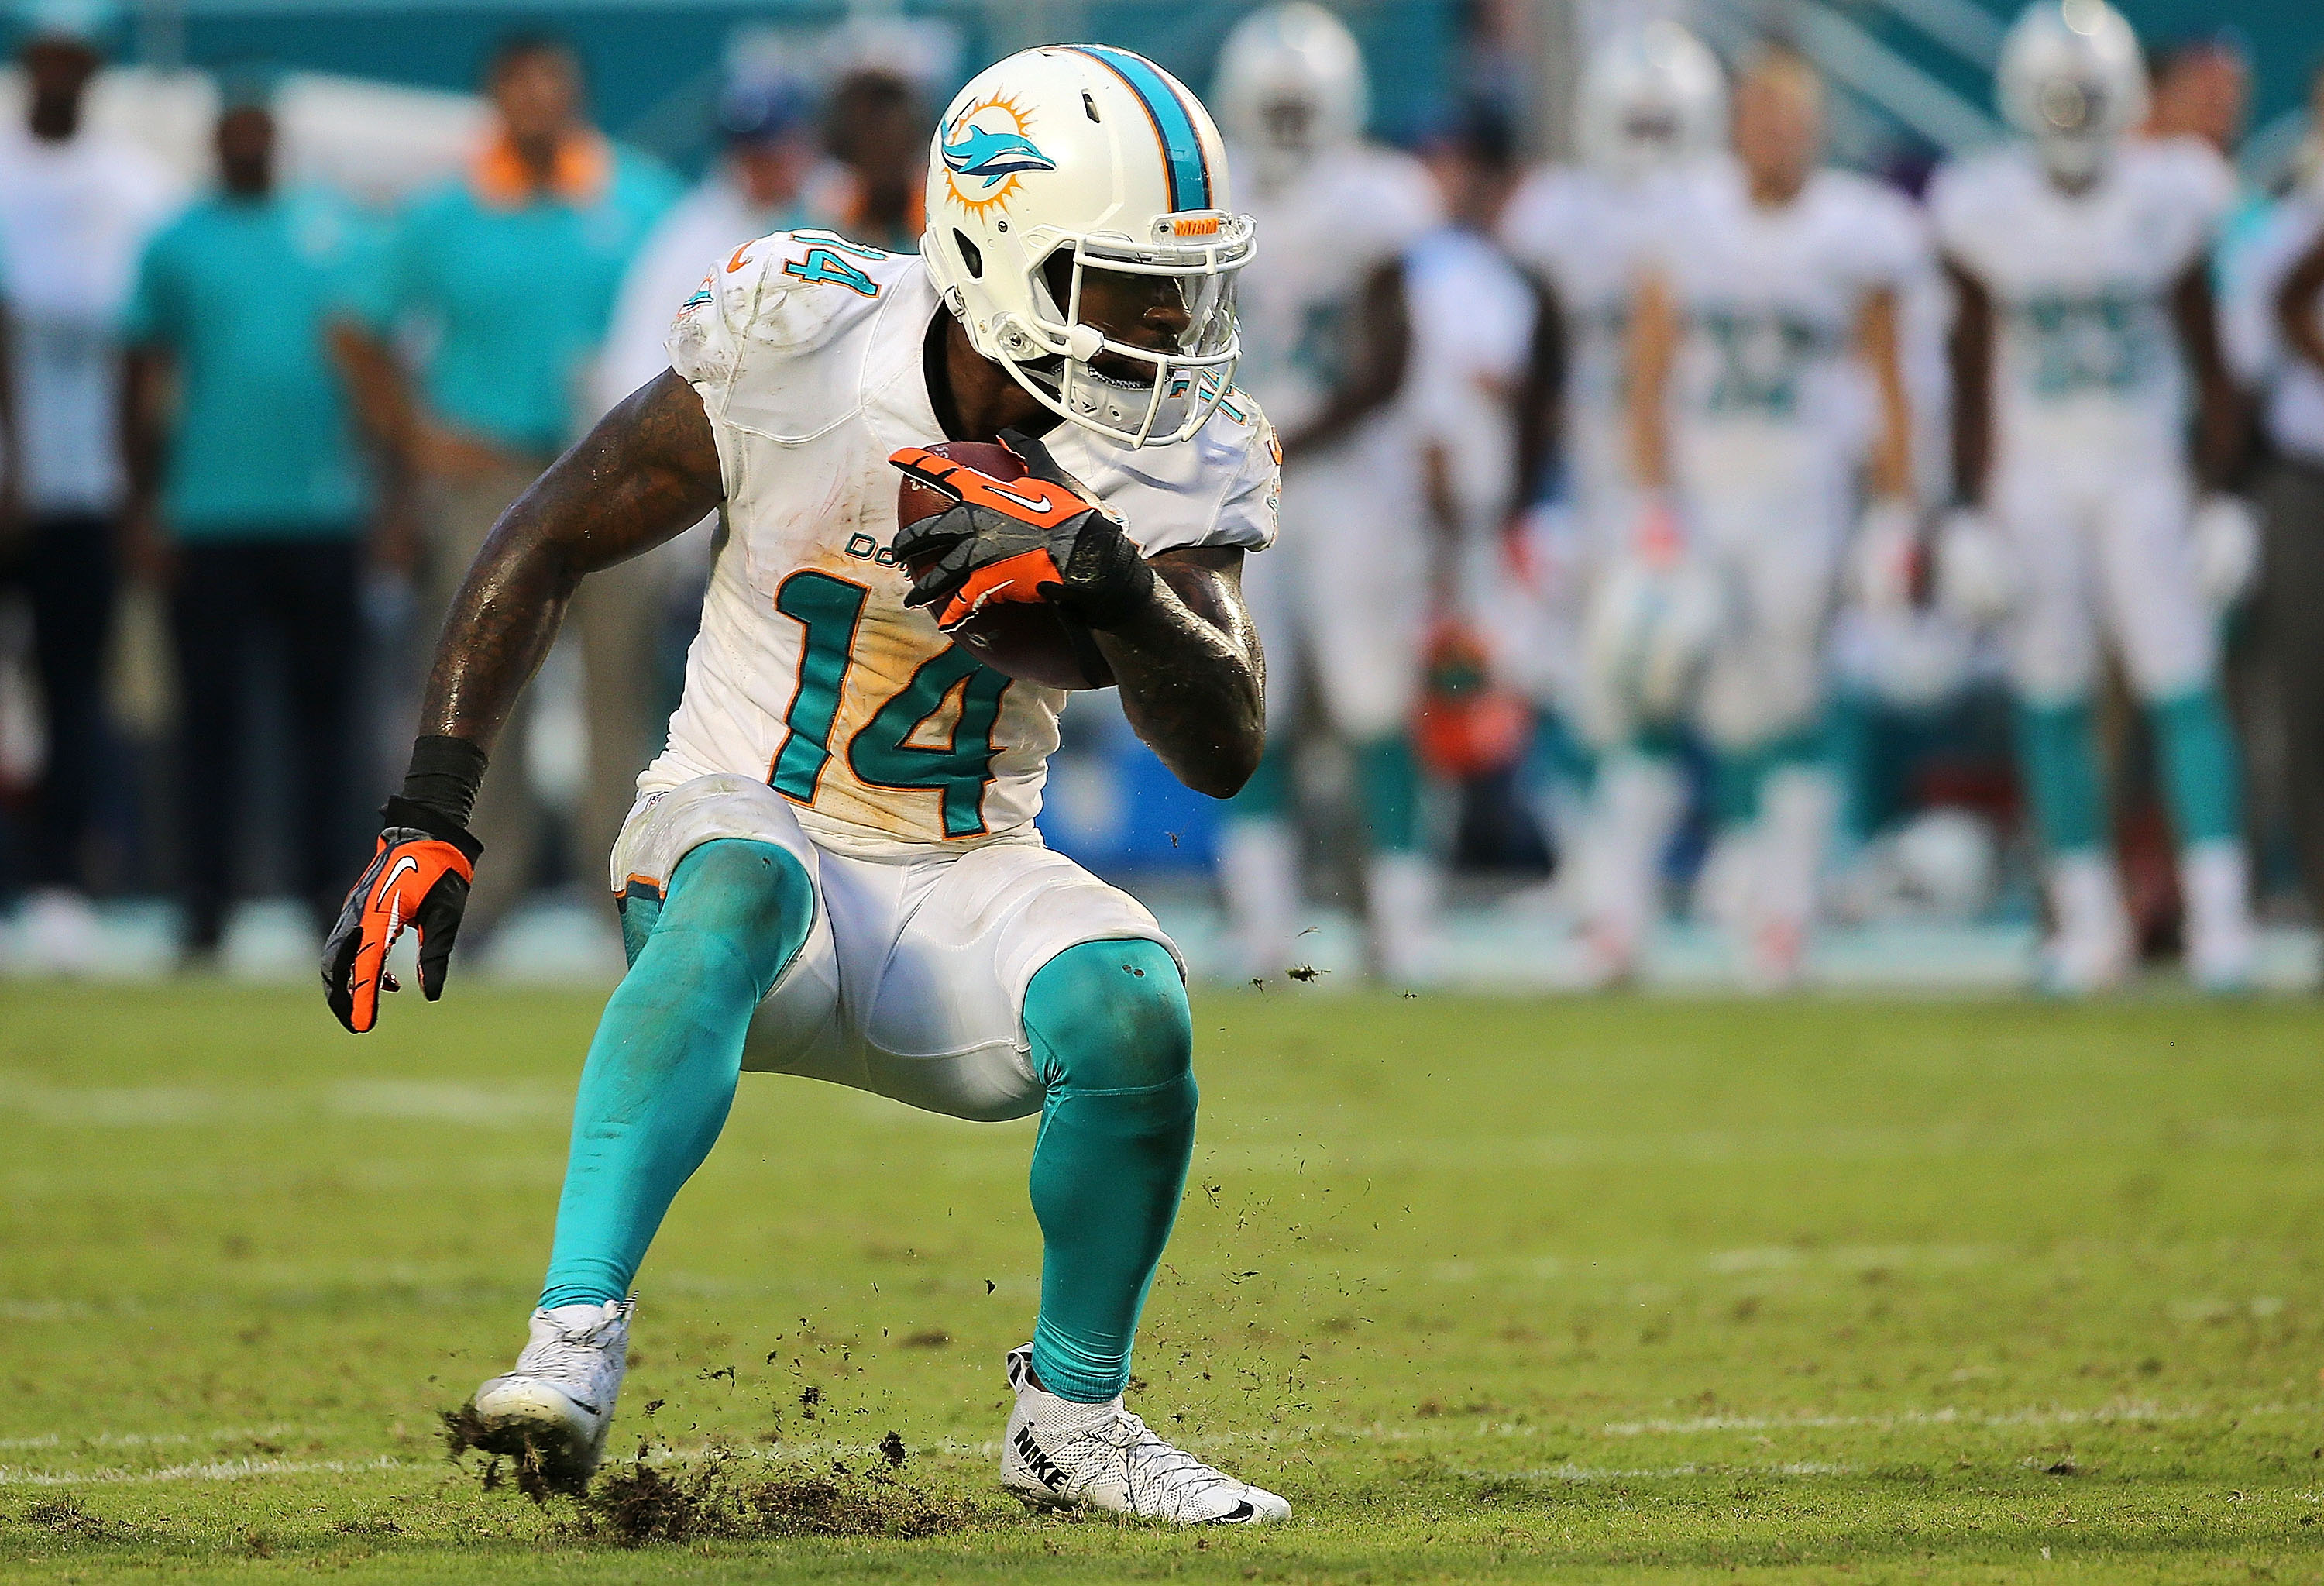 Jarvis Landry has emerged as one the NFL's top receivers (Getty).